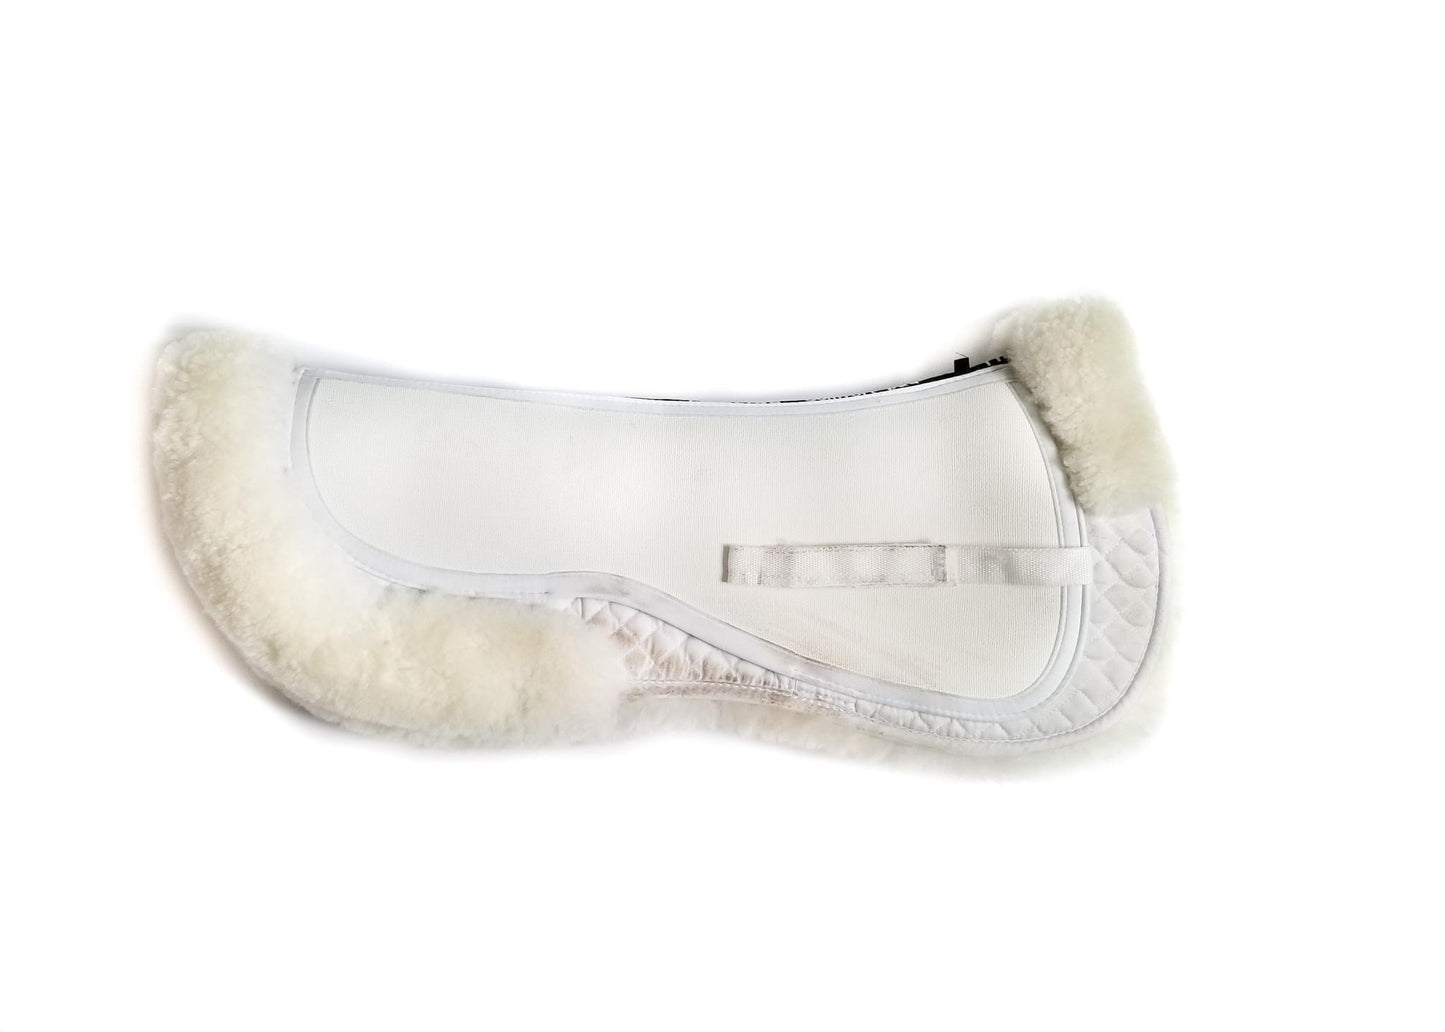 Thinline Sheepskin Comfort Half Pad (Shimmable) - White - Large